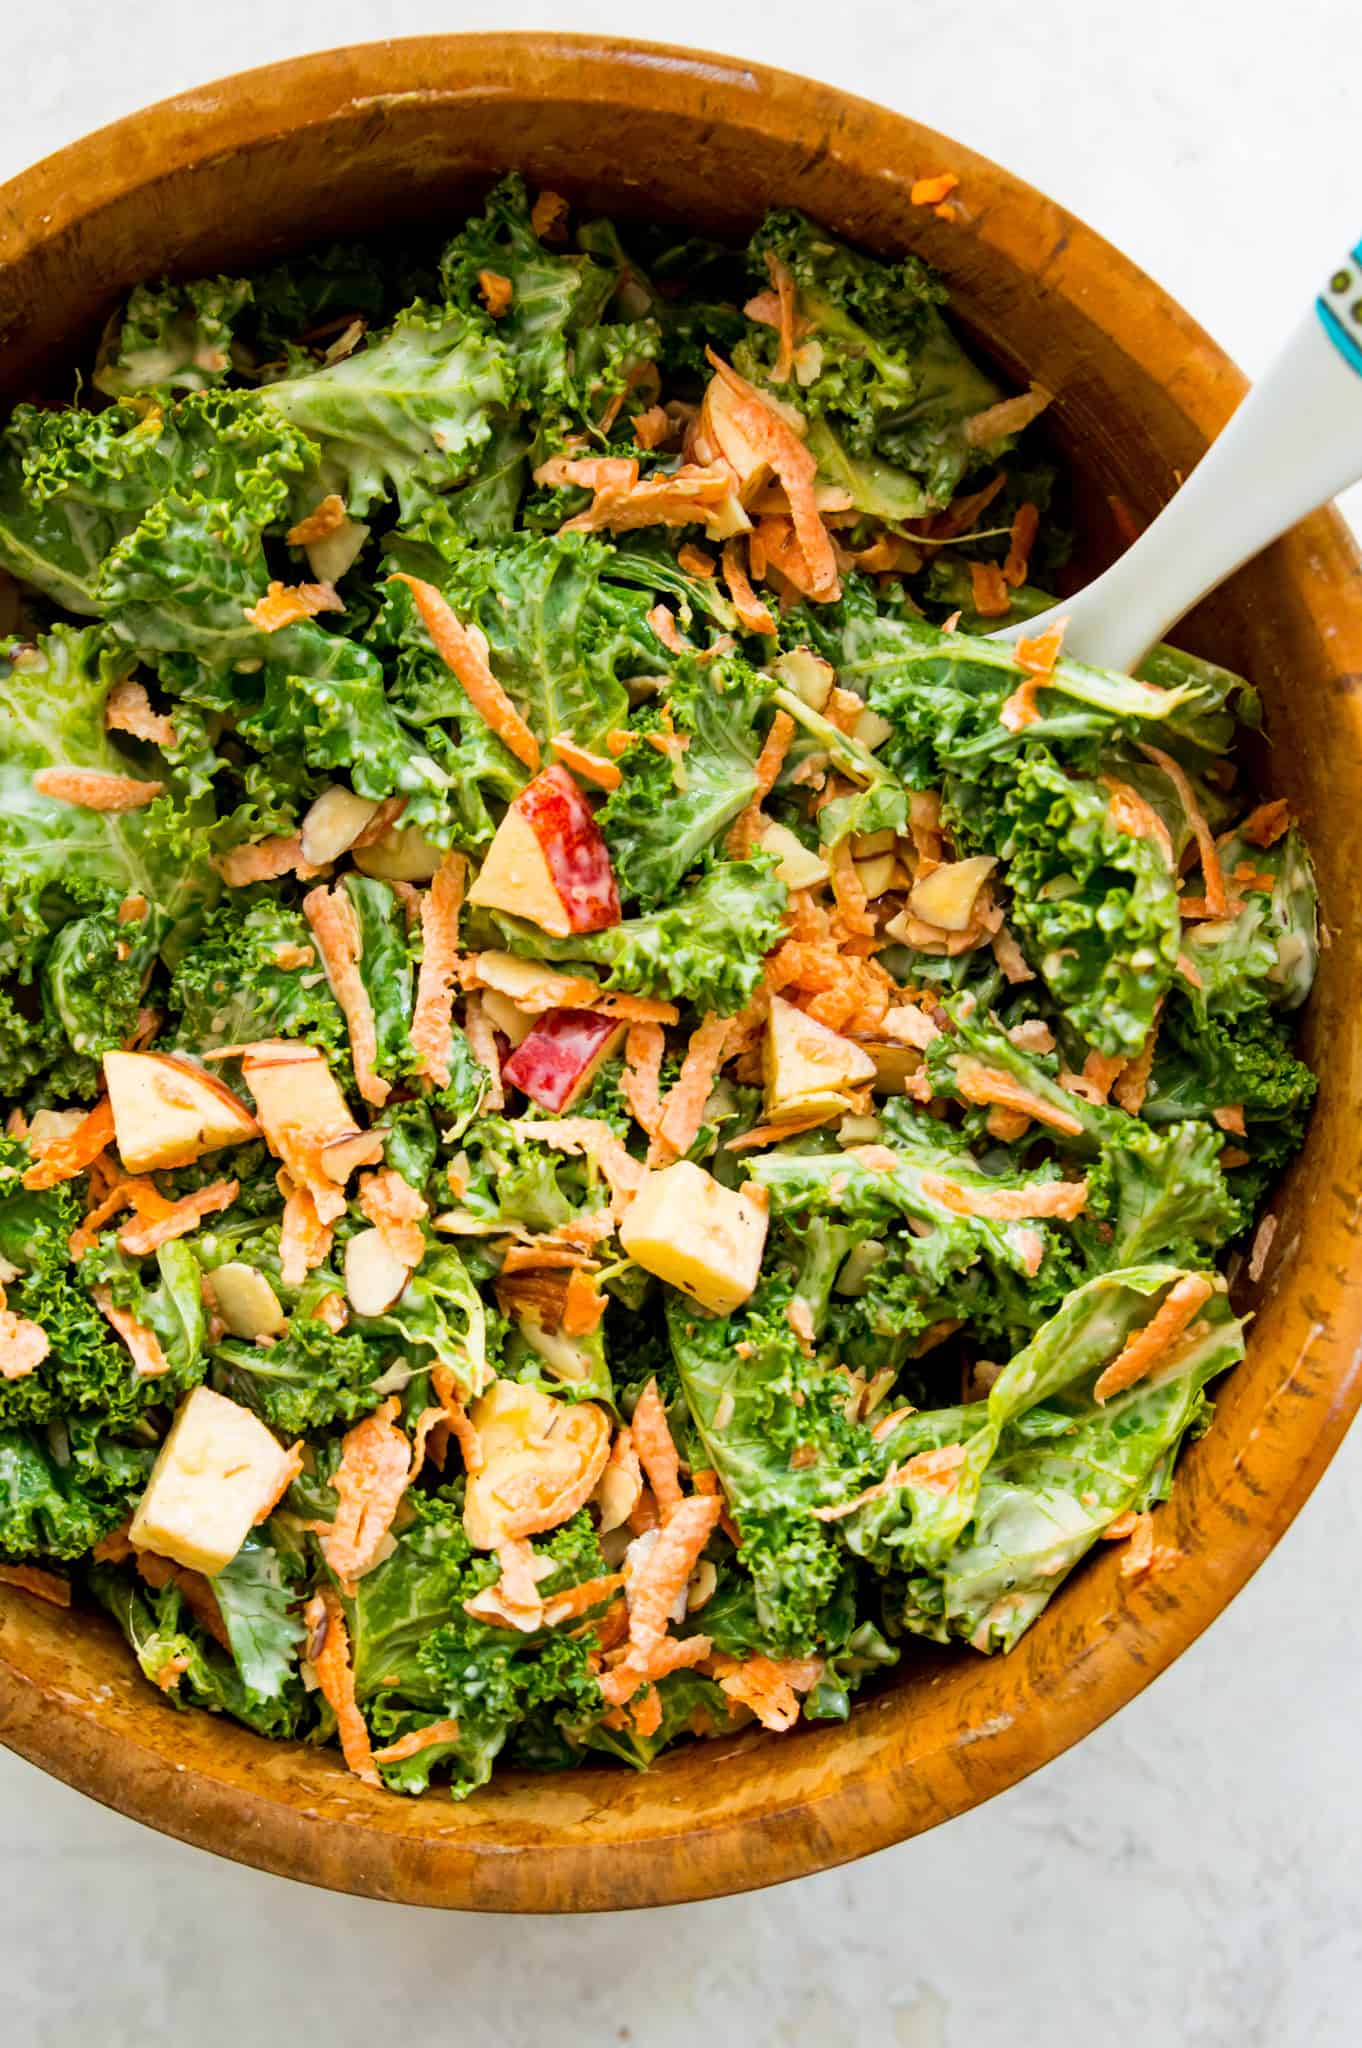 Kale and apple slaw in a wooden bowl with a spoon